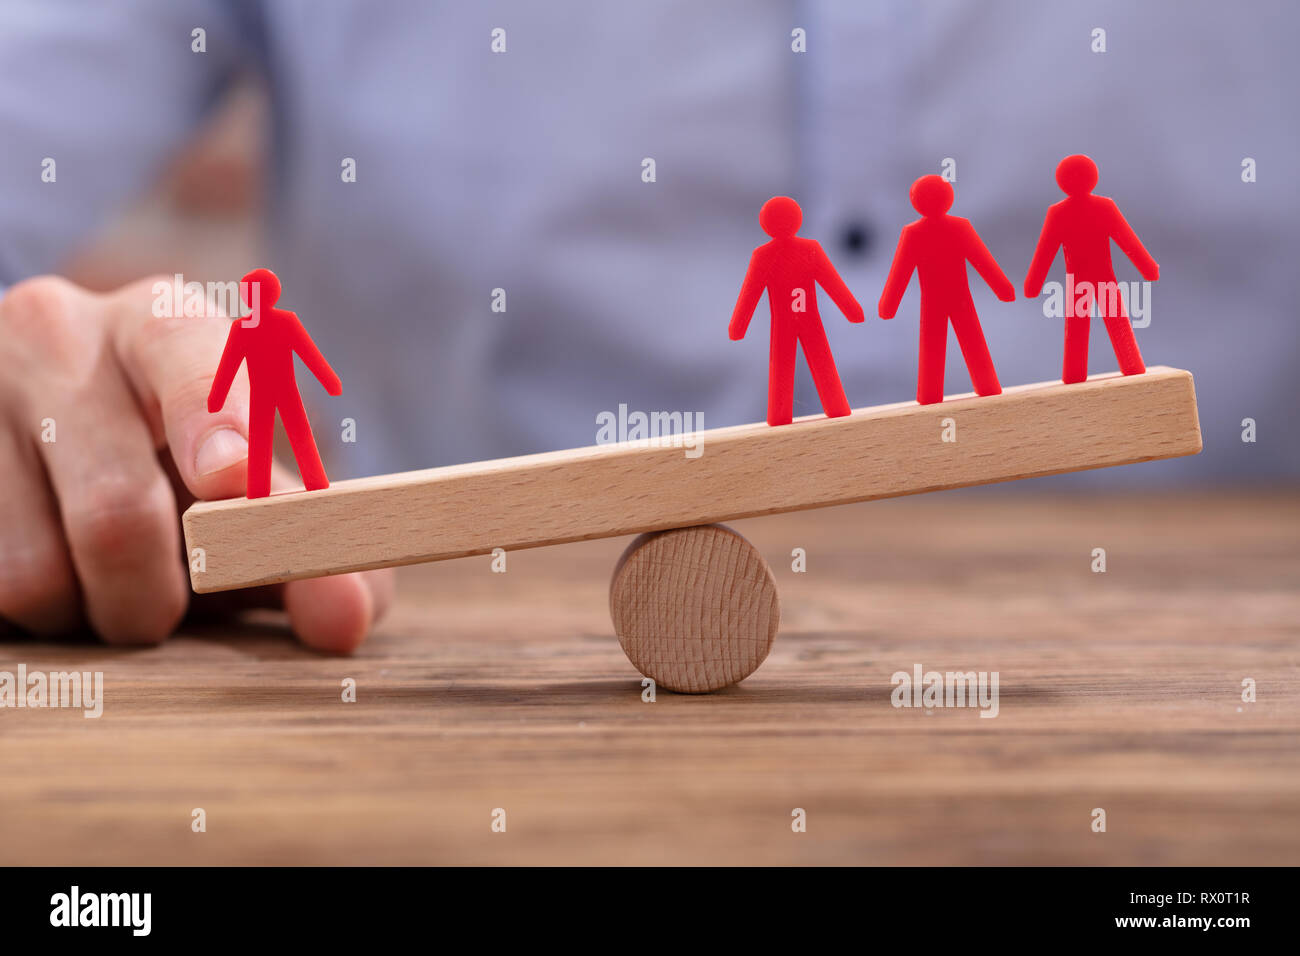 Businessperson's Hand Showing Imbalance Between Red Figures On Seesaw Over Wooden Desk Stock Photo